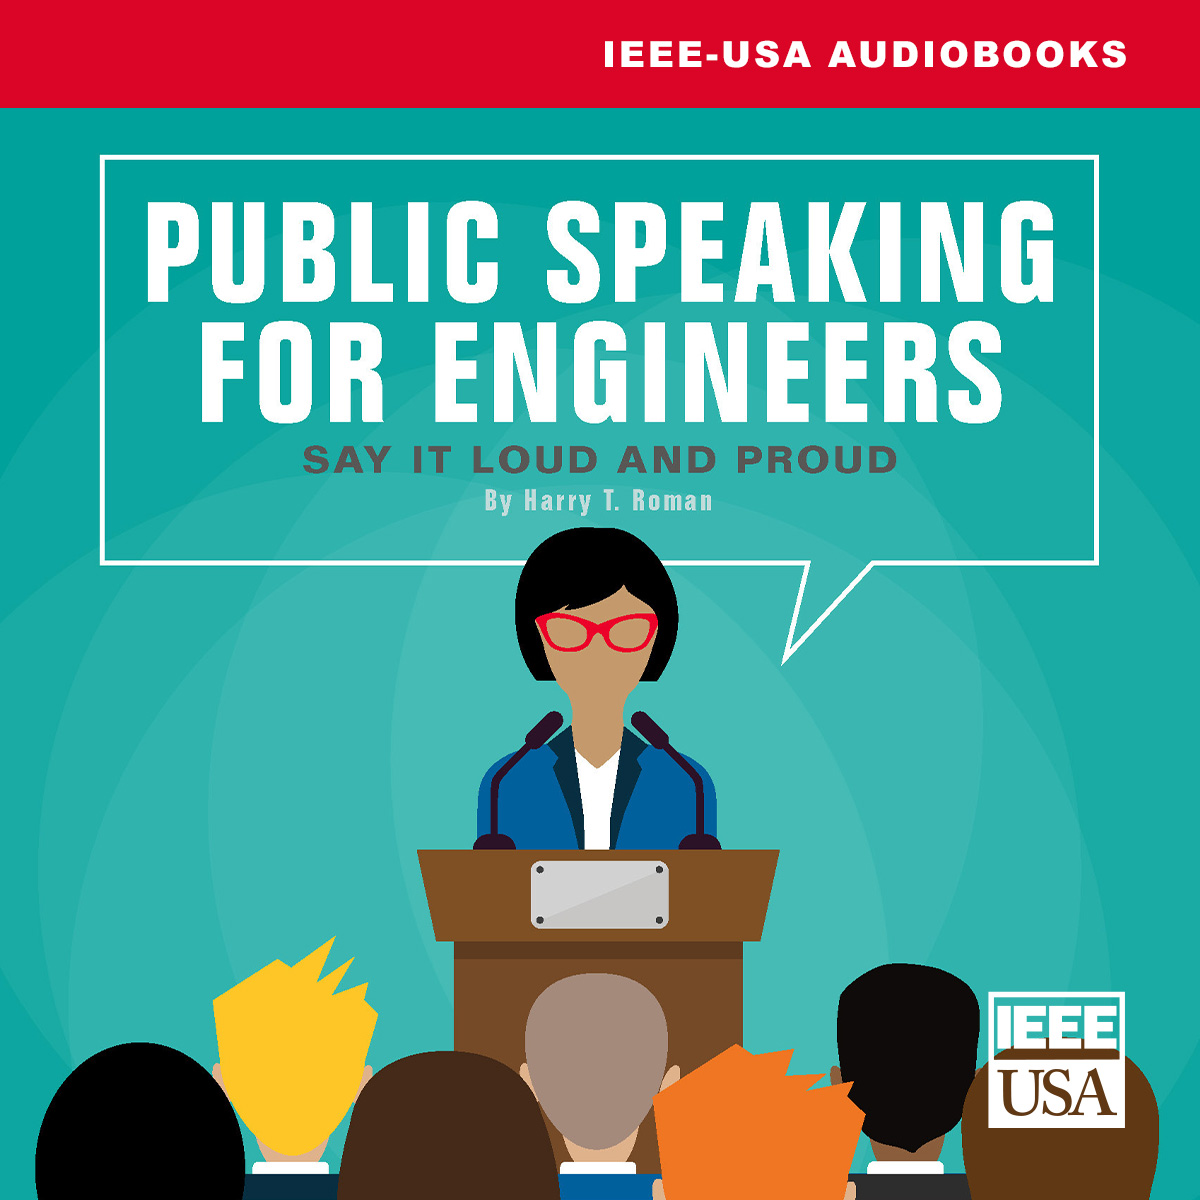 Audiobook: Public Speaking for Engineers—Say It Loud and Proud